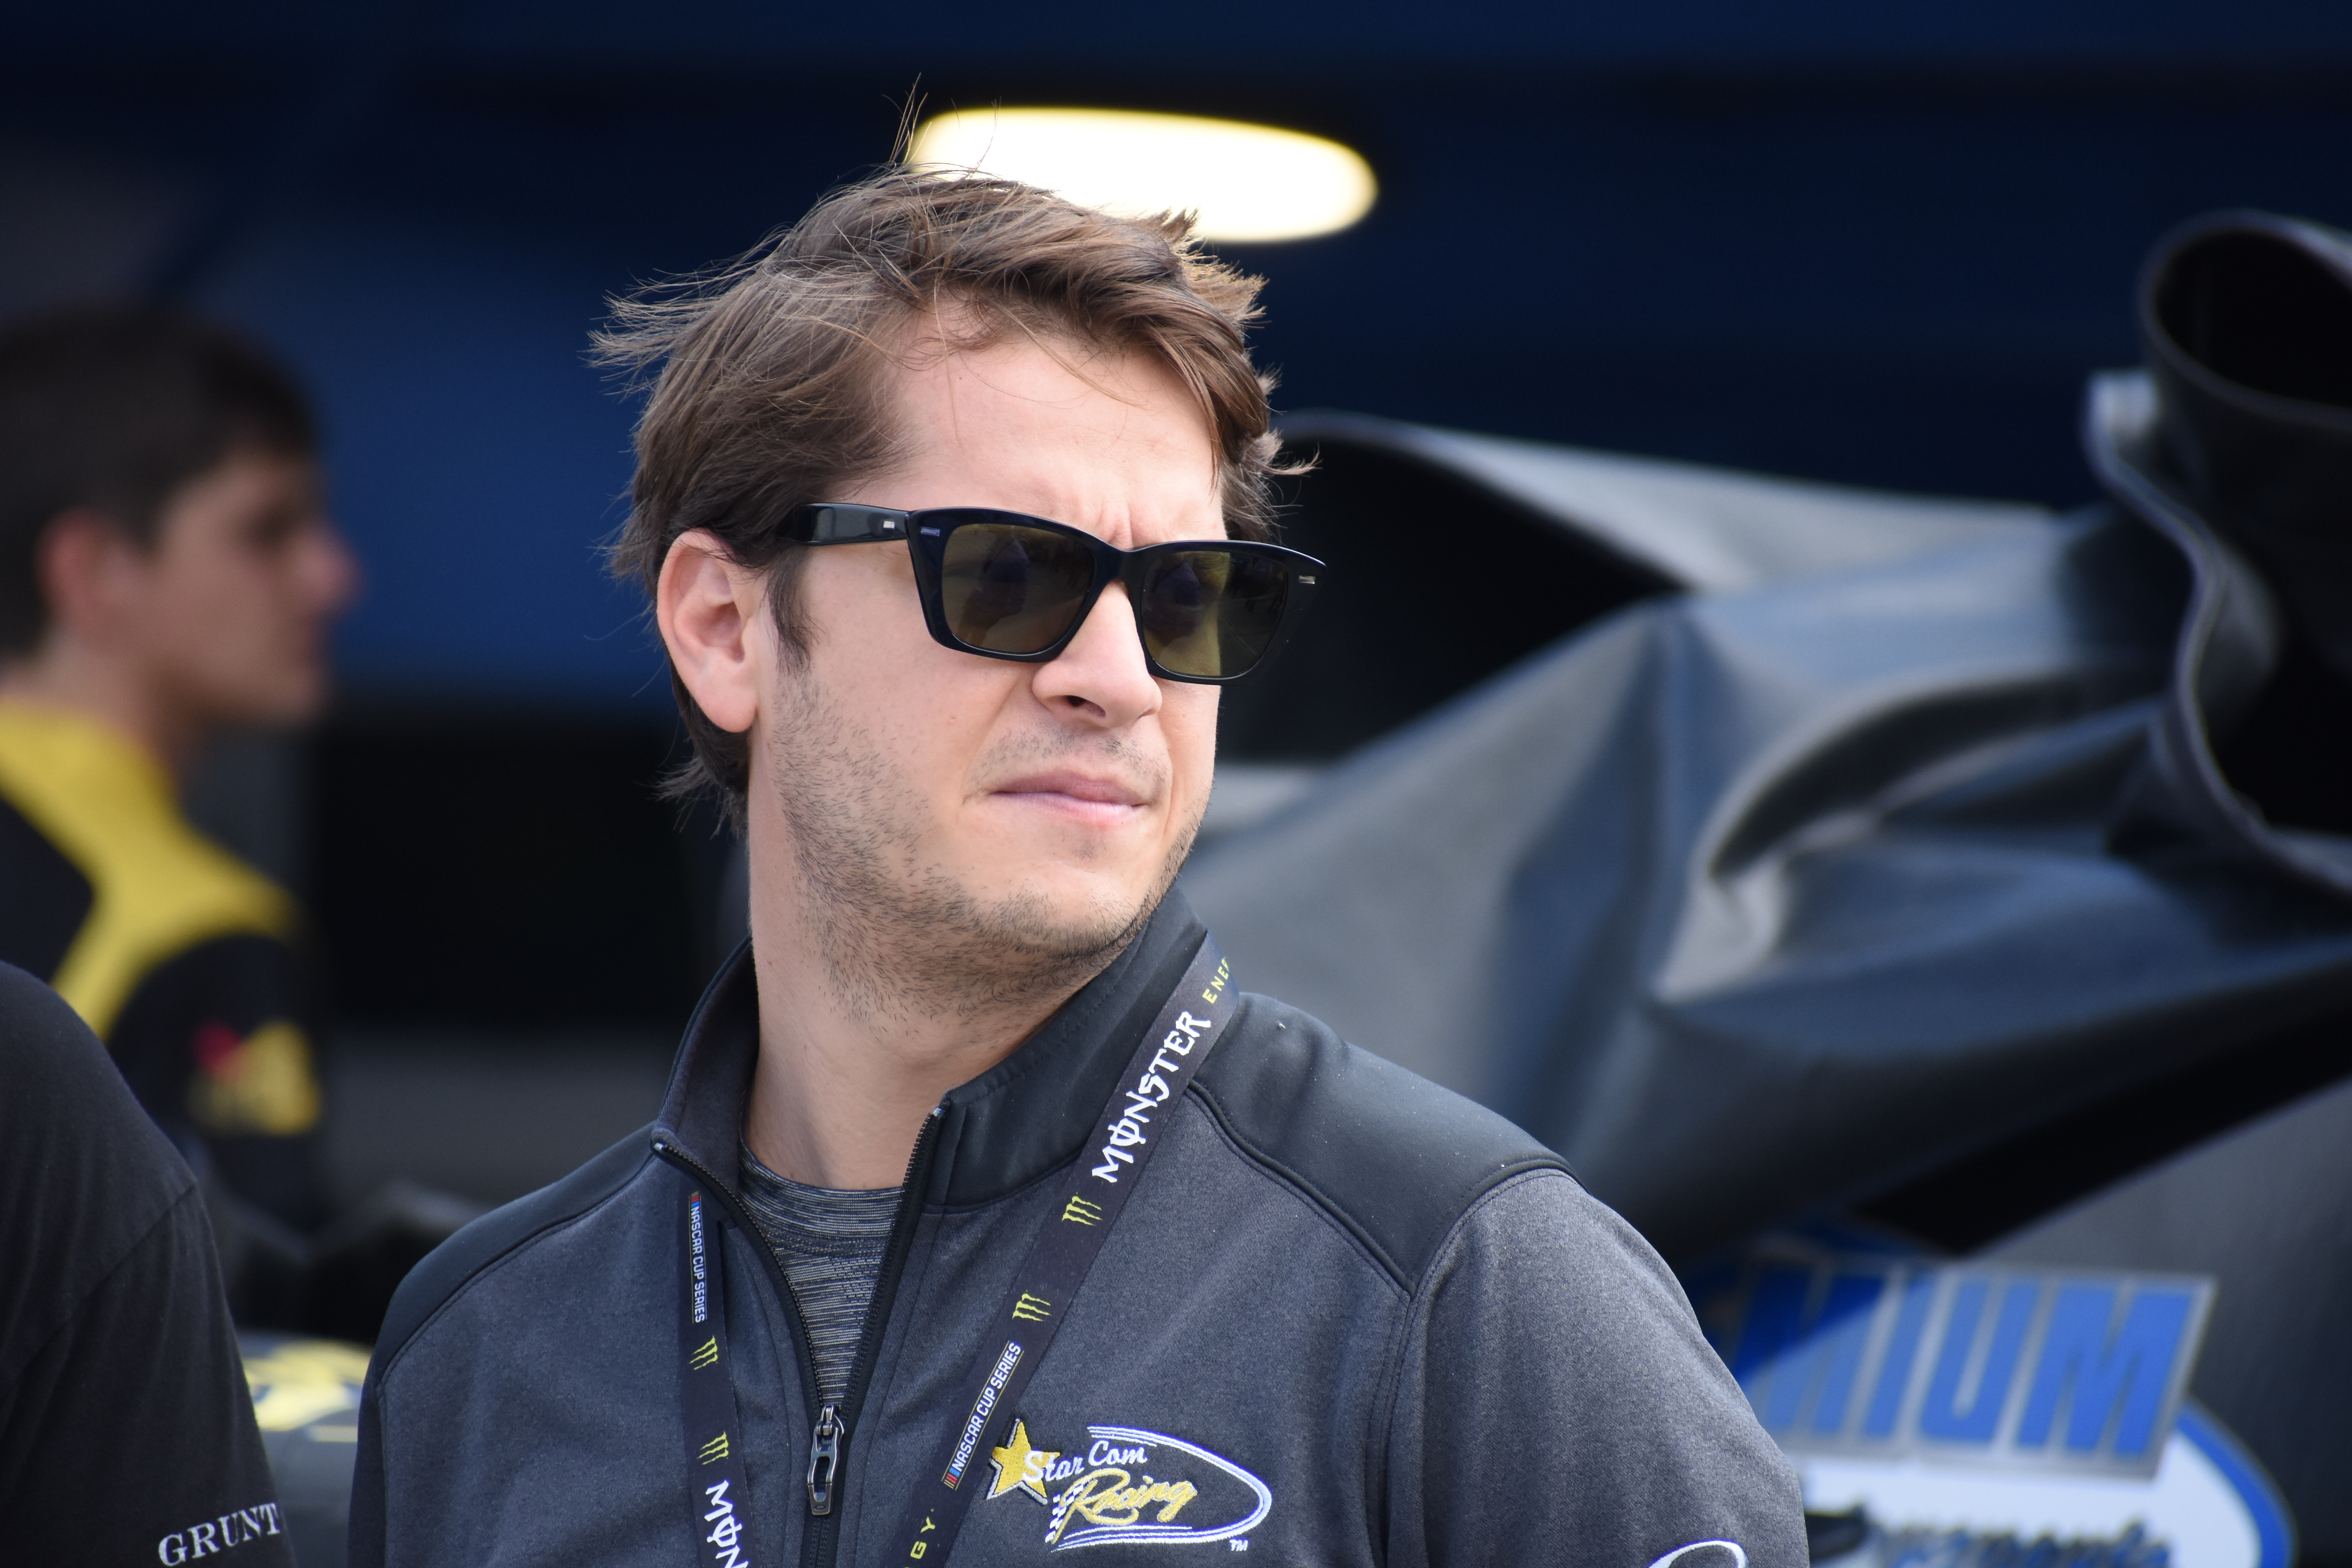 Be that as it may, Landon Cassill desires for an even better experience for race fans. (Photo Credit: Michael Guariglia/TPF)